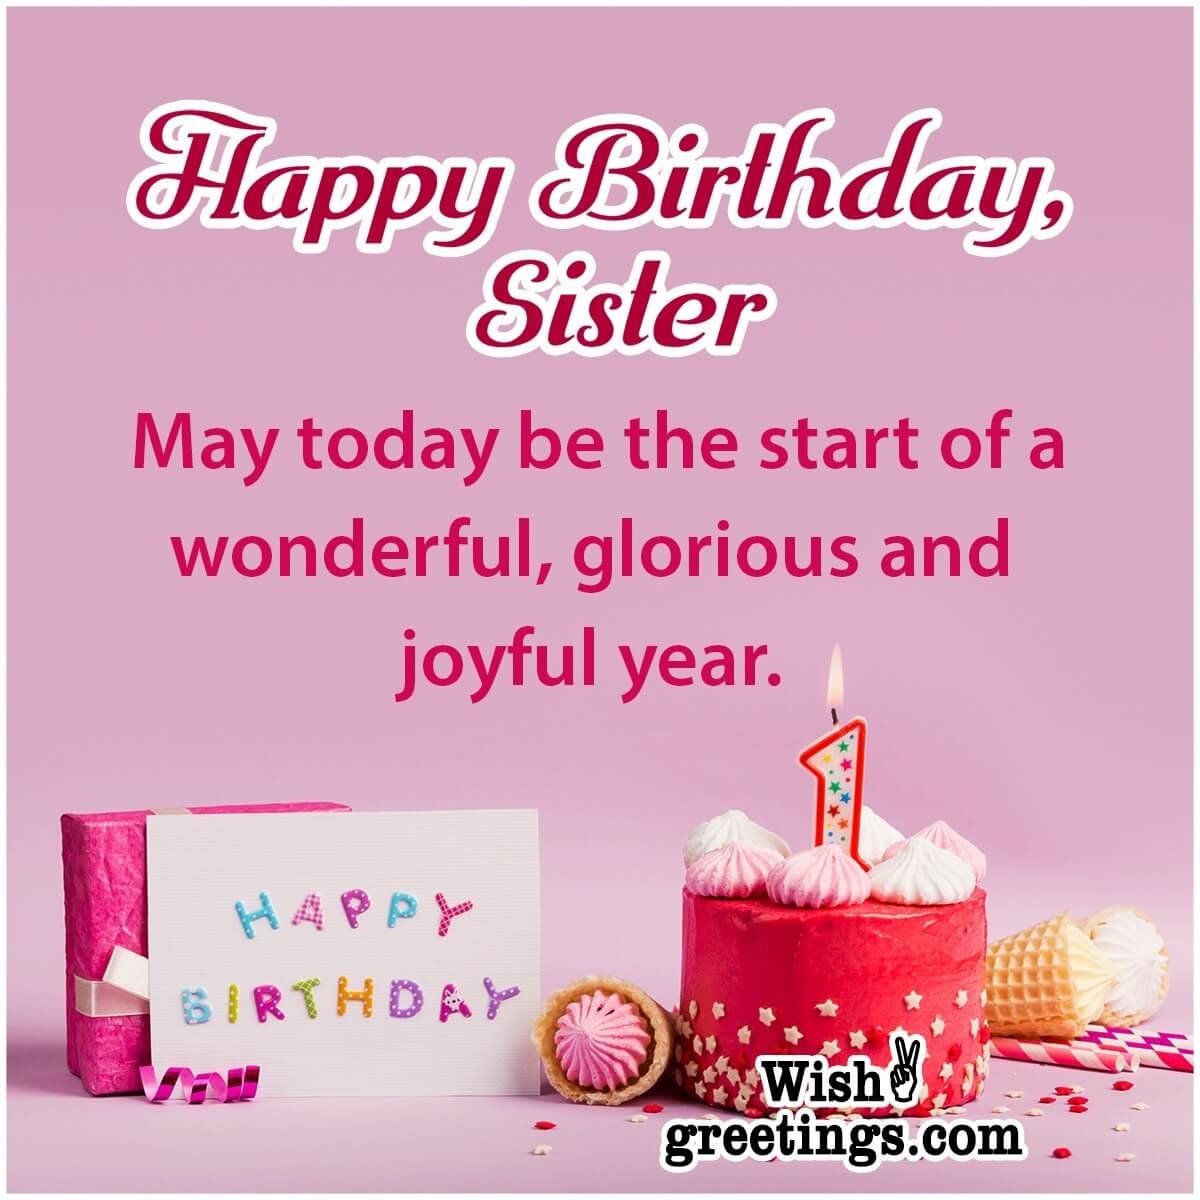 Birthday Wishes for Sister - Wish Greetings